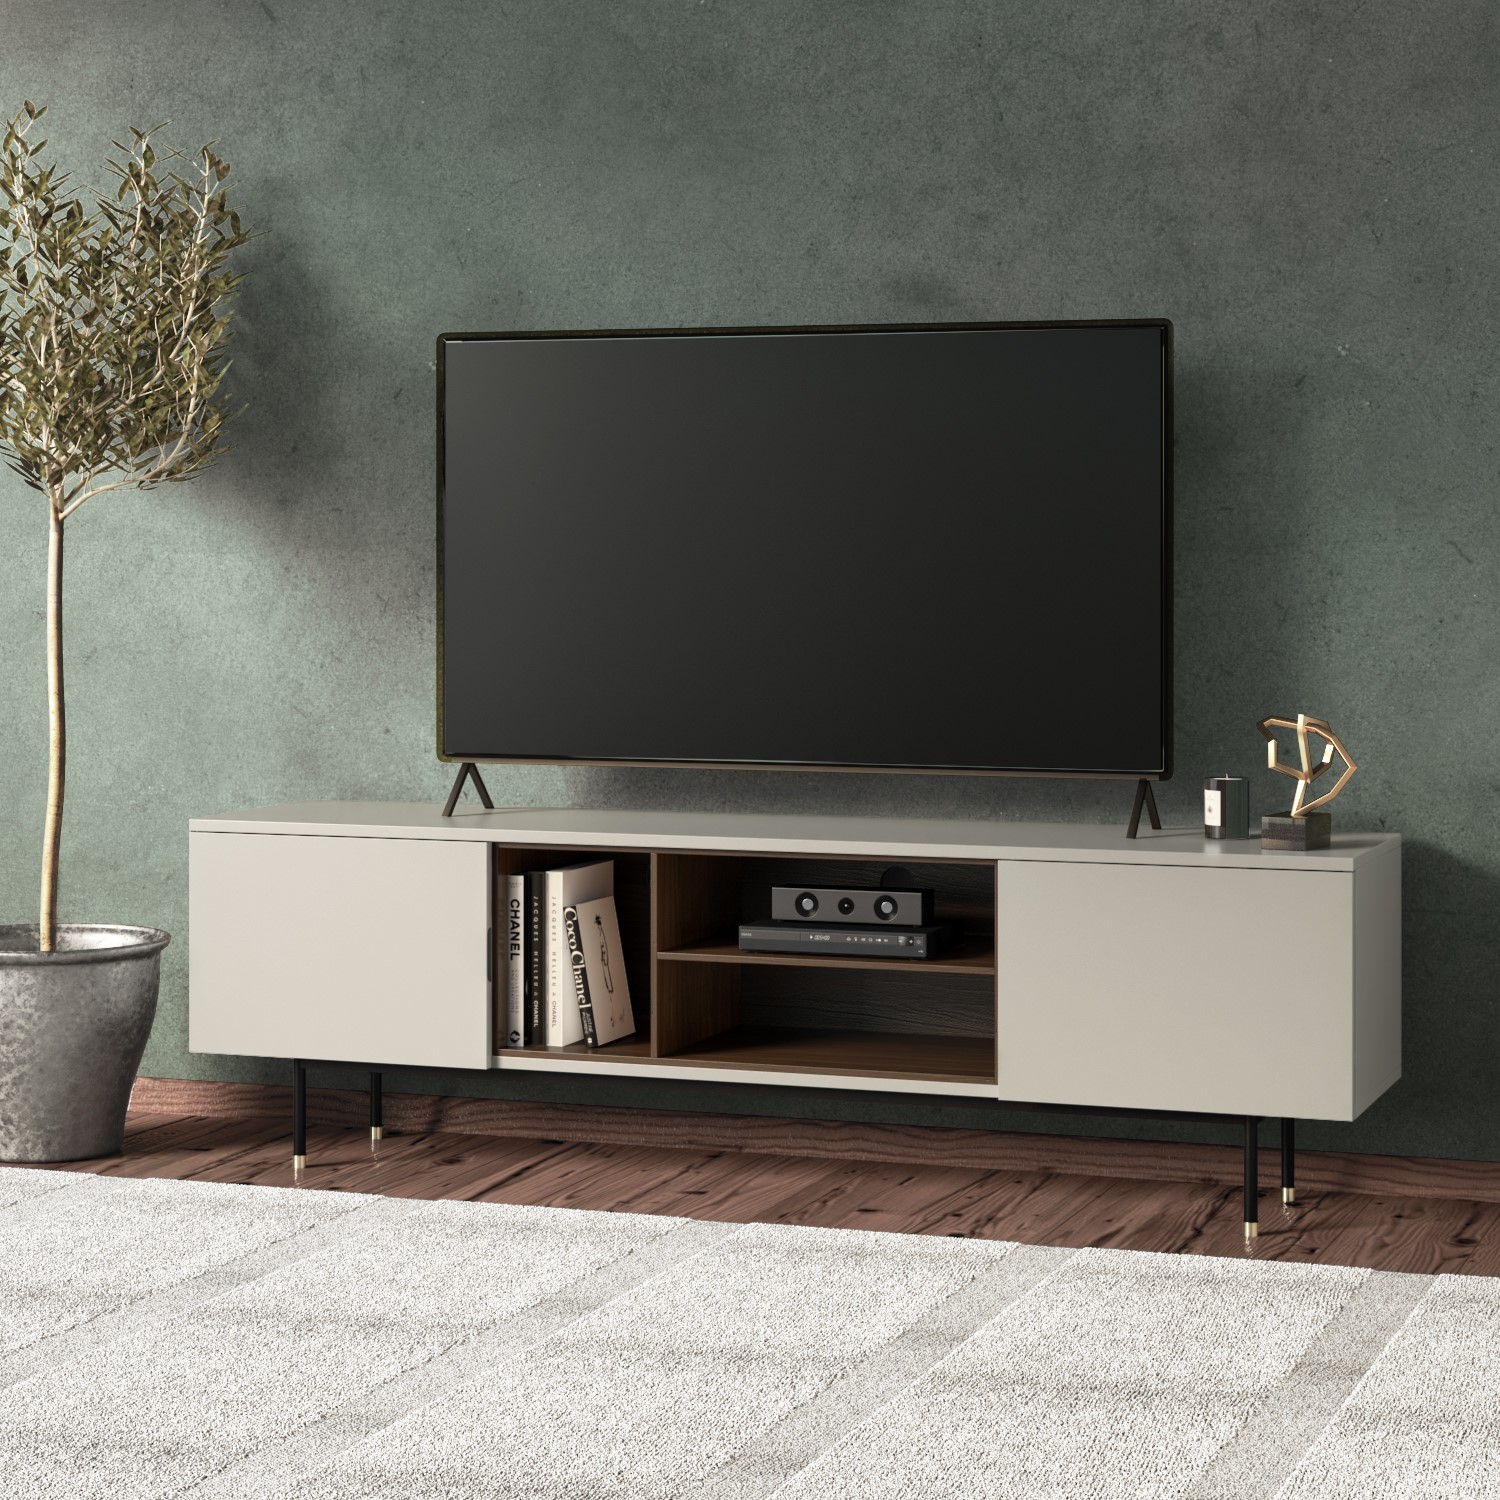 Tv Unit In Taupe With Storage Shelves, Tv Stands Closed Shelving